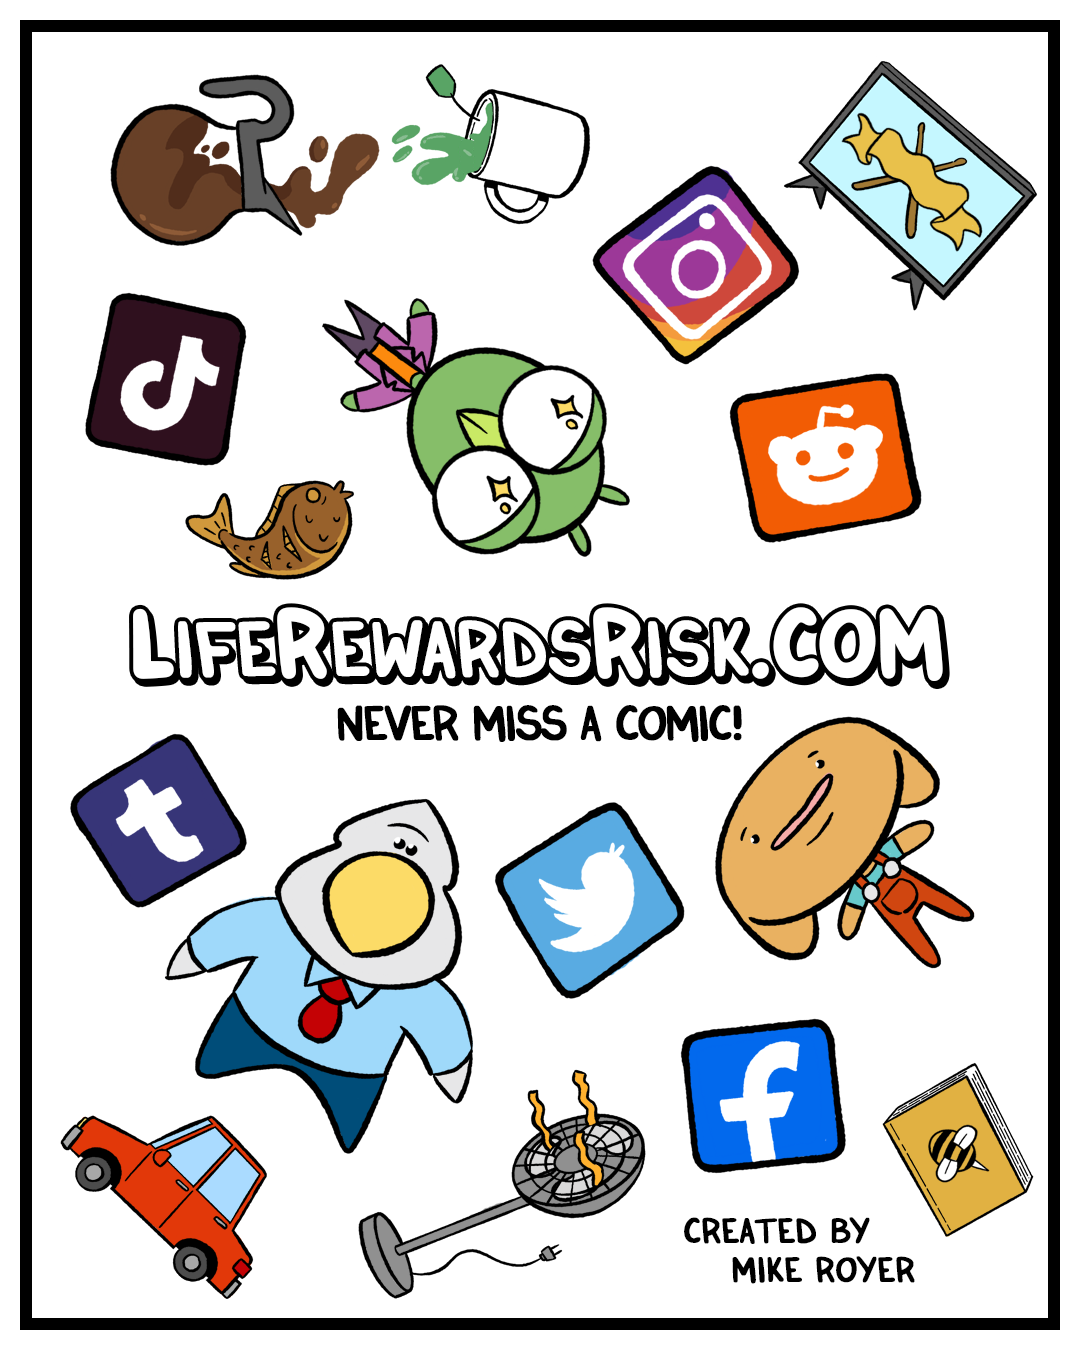 Life Rewards Risk by Mike Royer